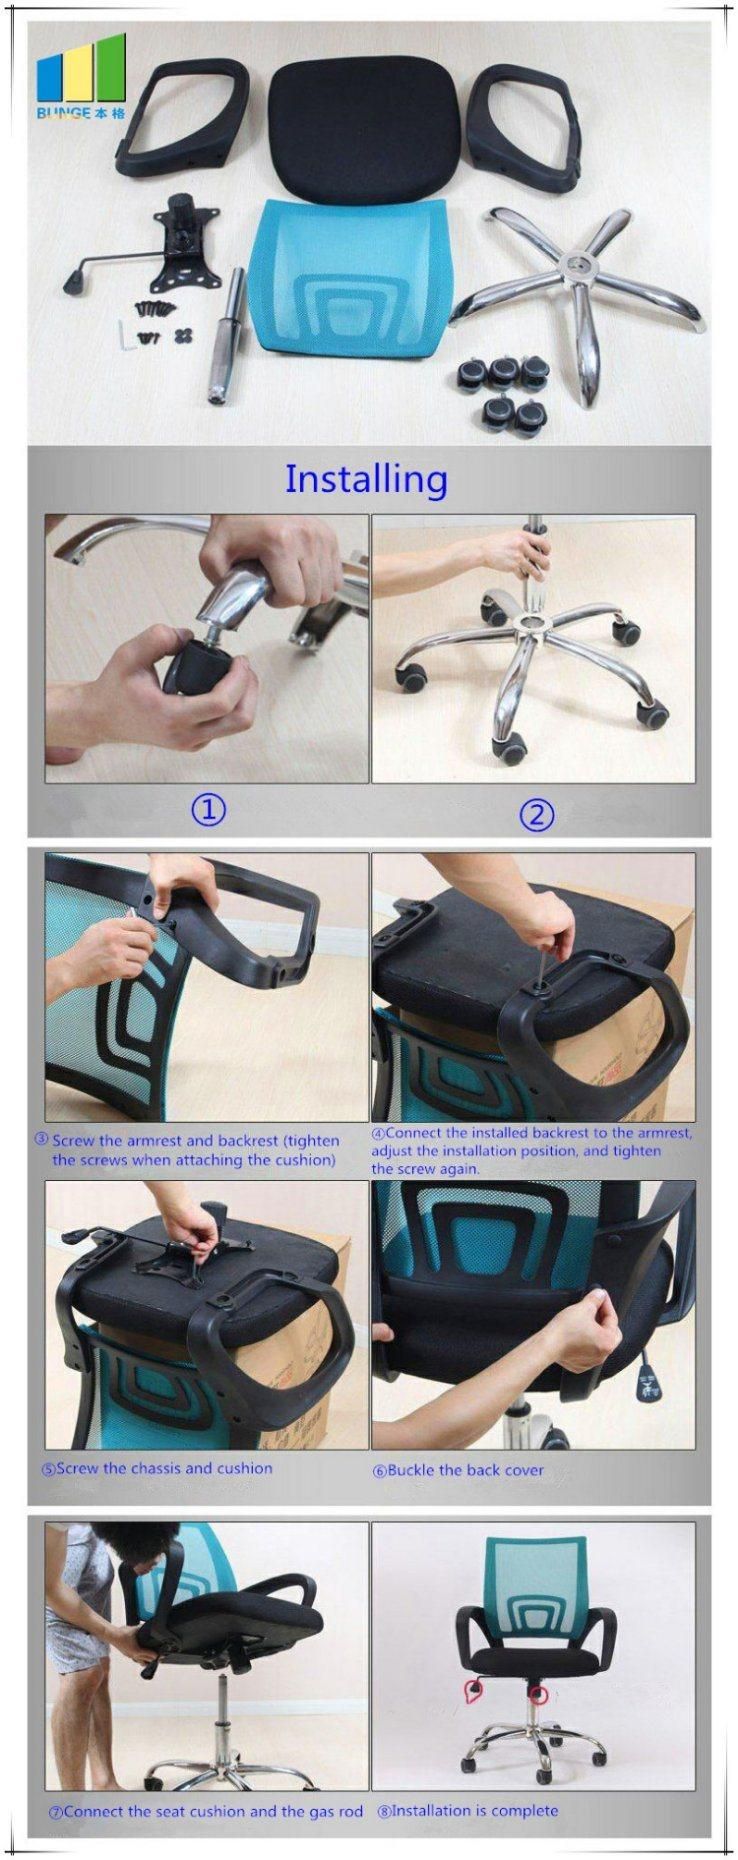 Ergonomic Workstation Chair Conference Room Office Chair with Wheels